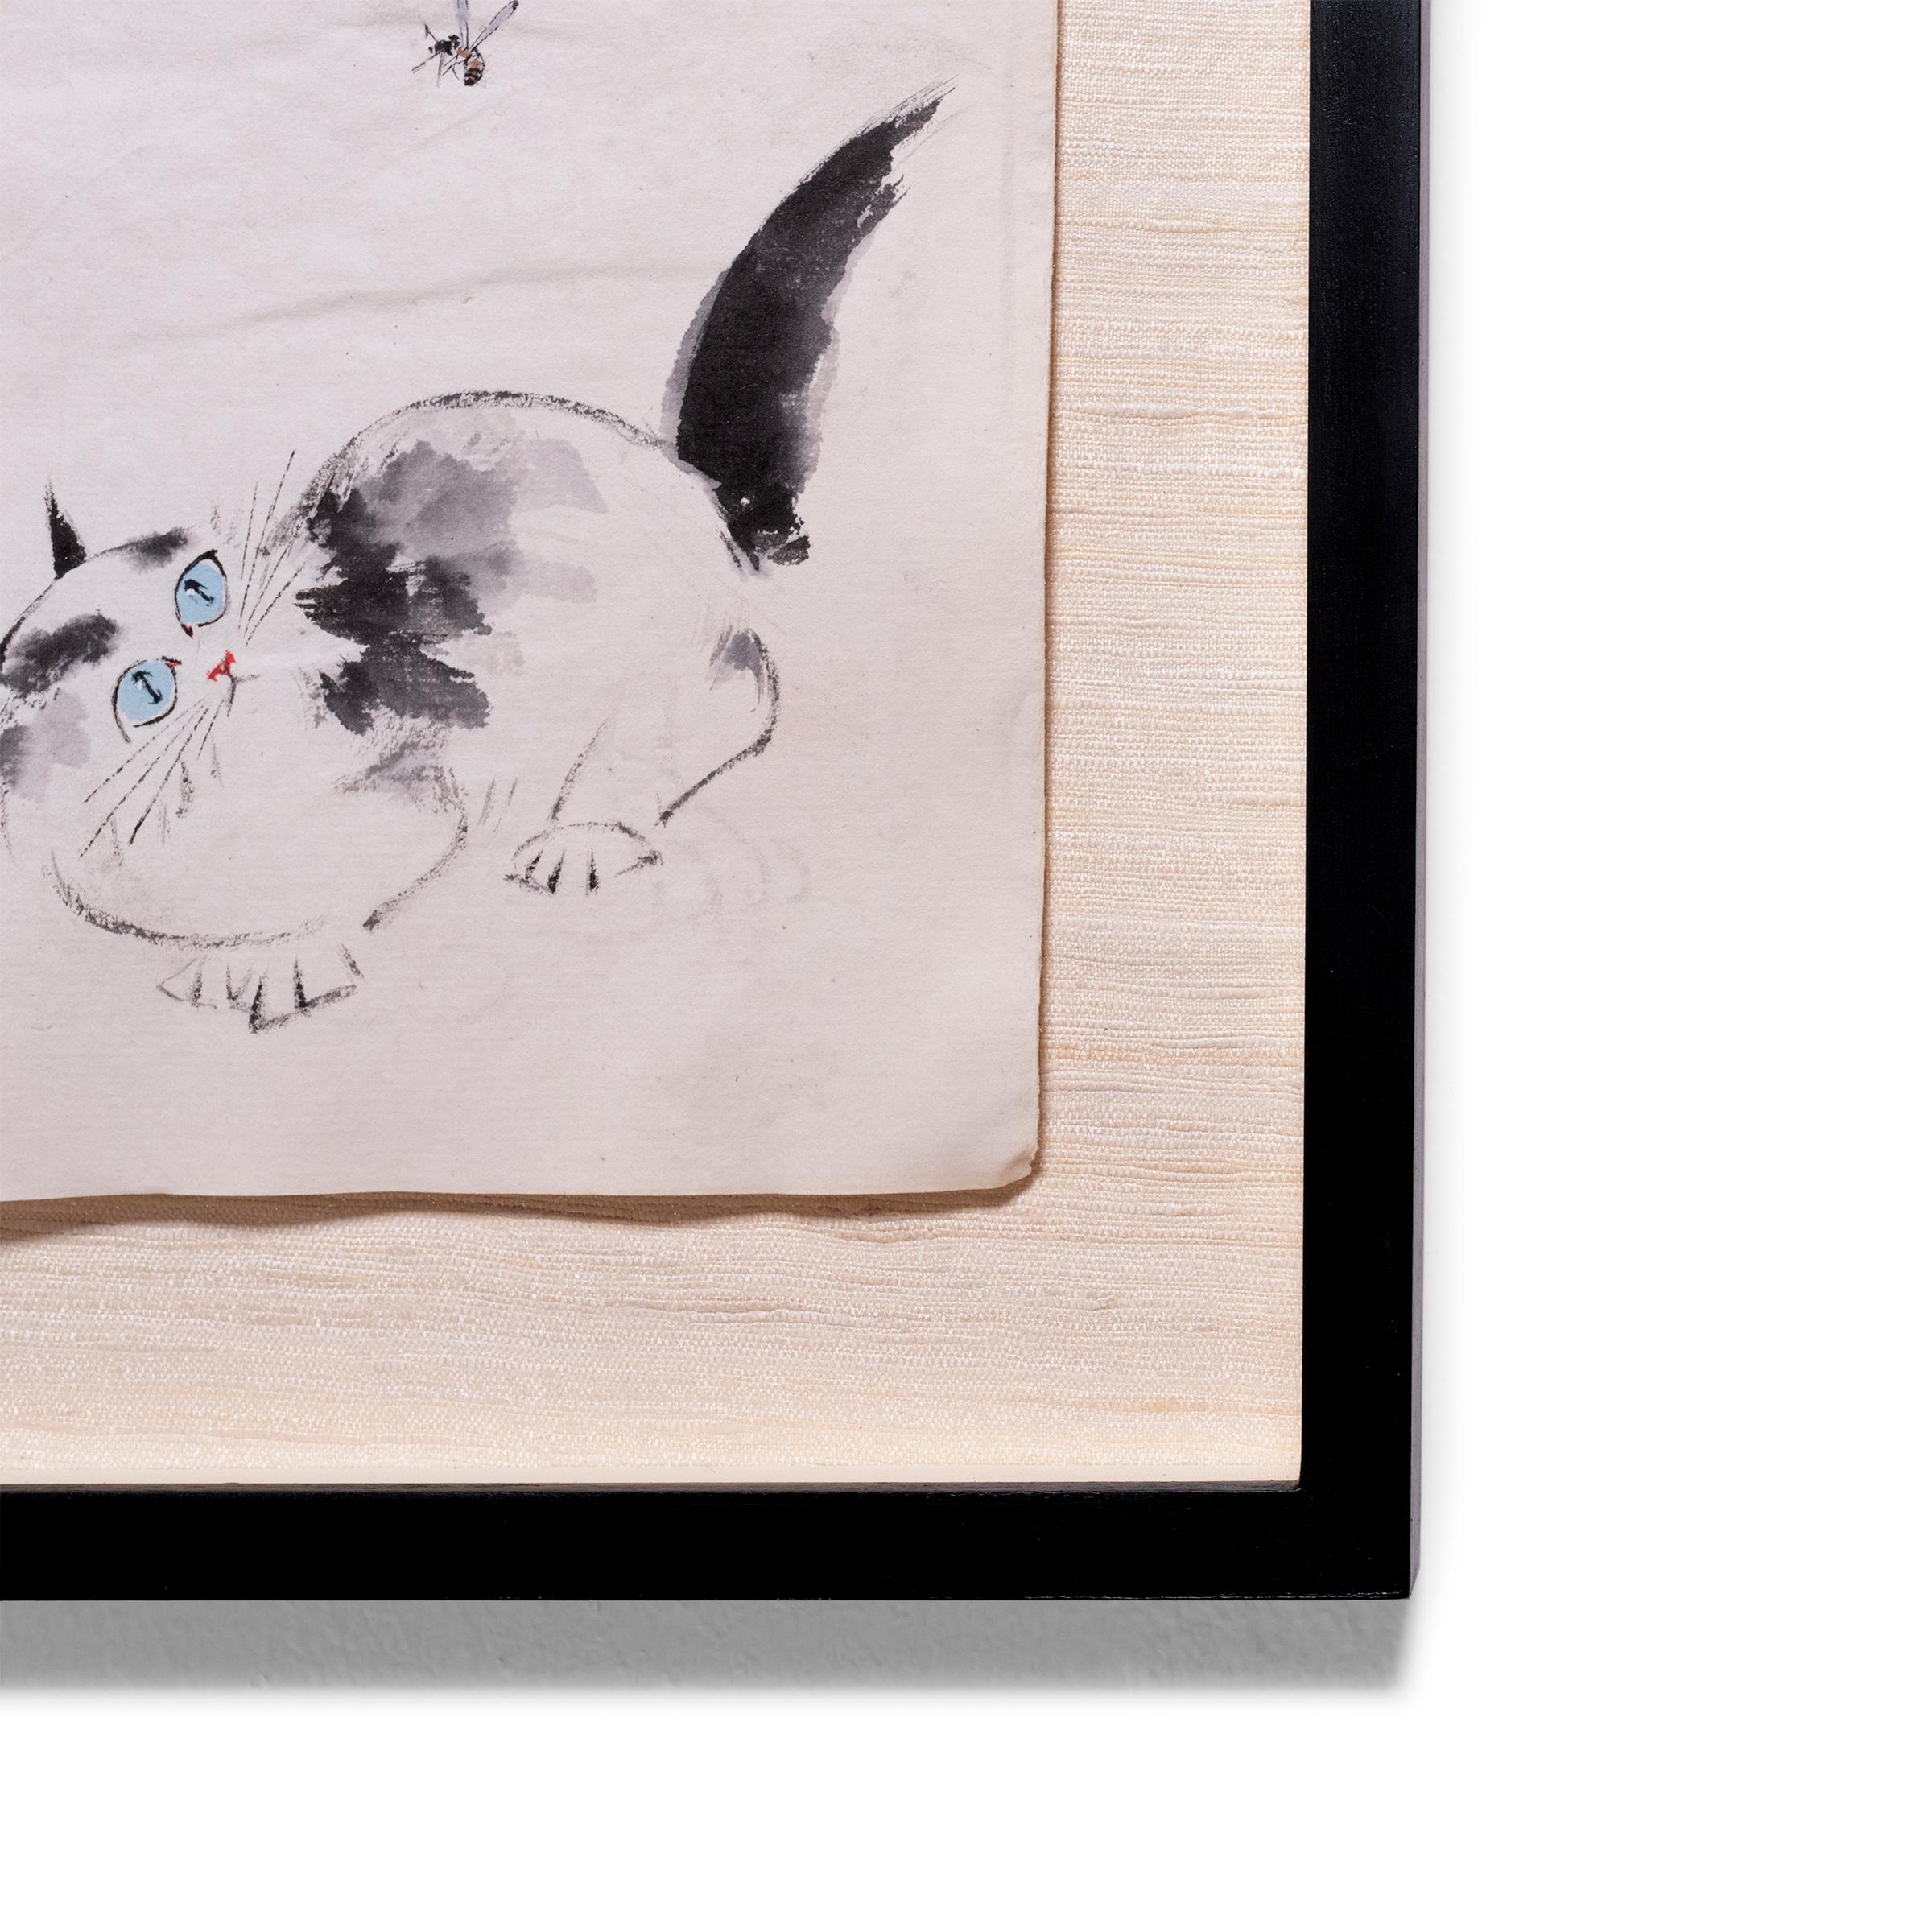 This charming ink painting is a contemporary example of the traditional art of calligraphy painting. With a careful hand, the artist uses just a few brush strokes to capture the playful nature of a curious kitten, crouched on all fours and peering